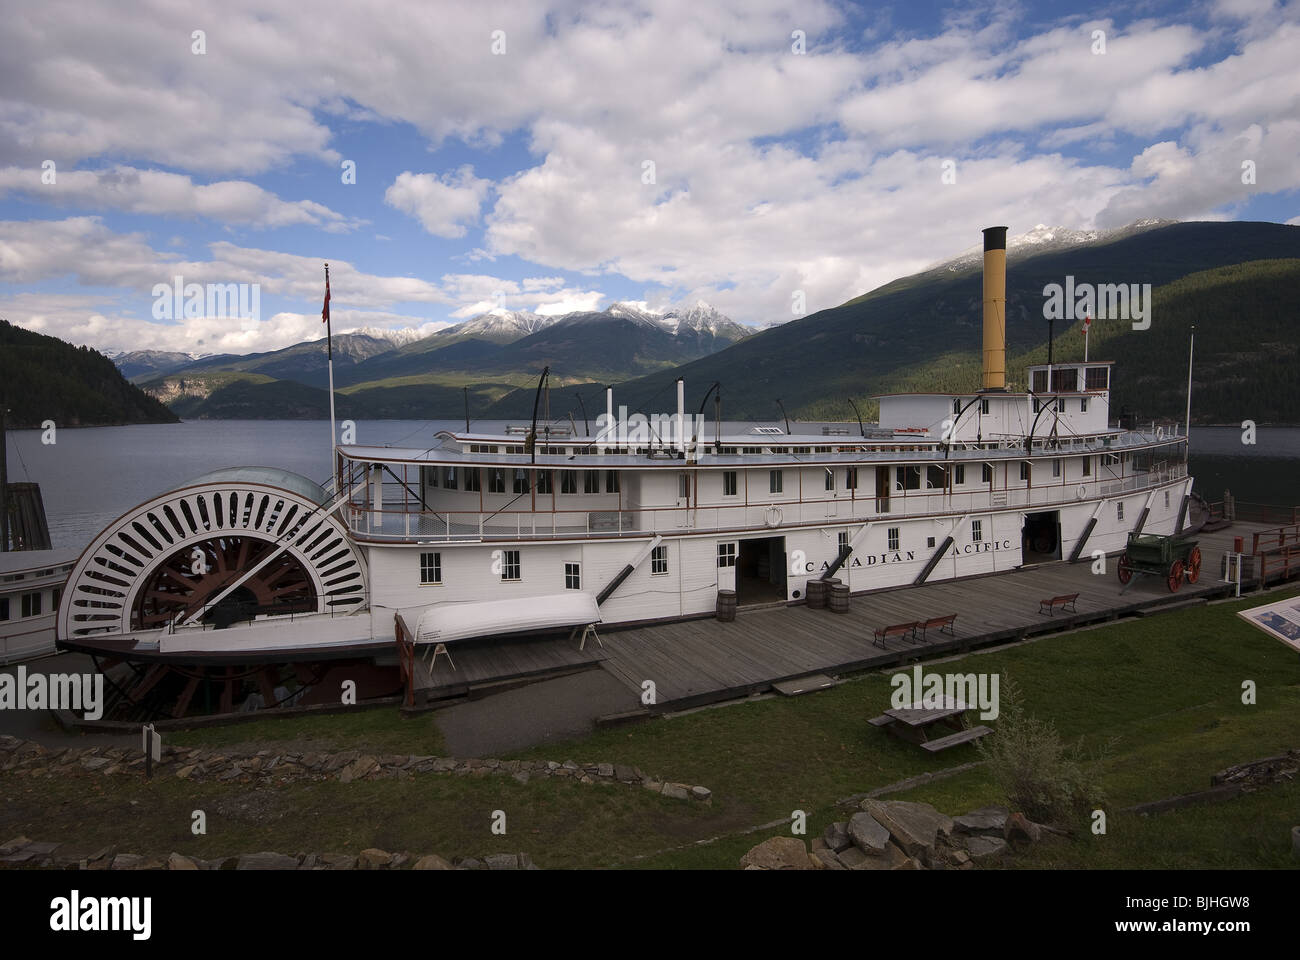 Canadian Pacific Paddle Wheeler Steamboat in British Columbia Stock Photo